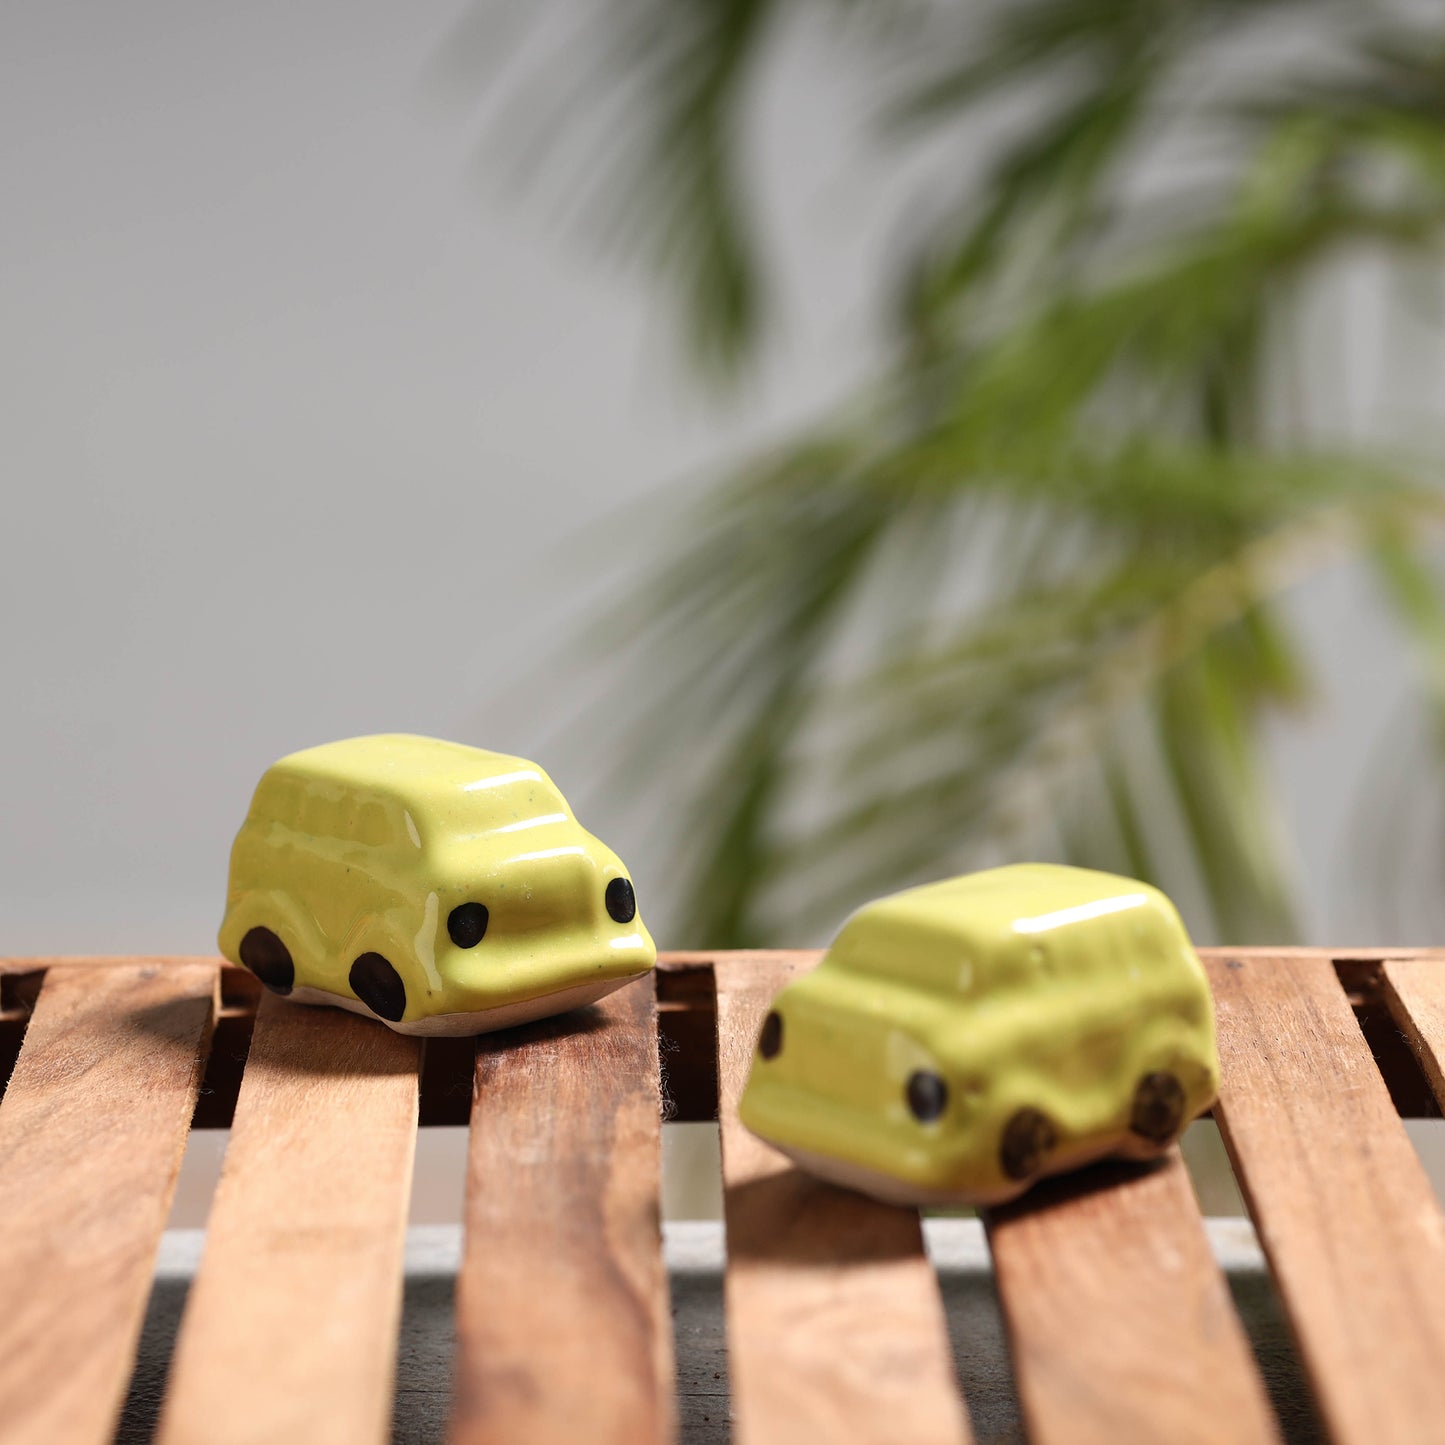 Car - Handcrafted Ceramic Toys (Set of 2)